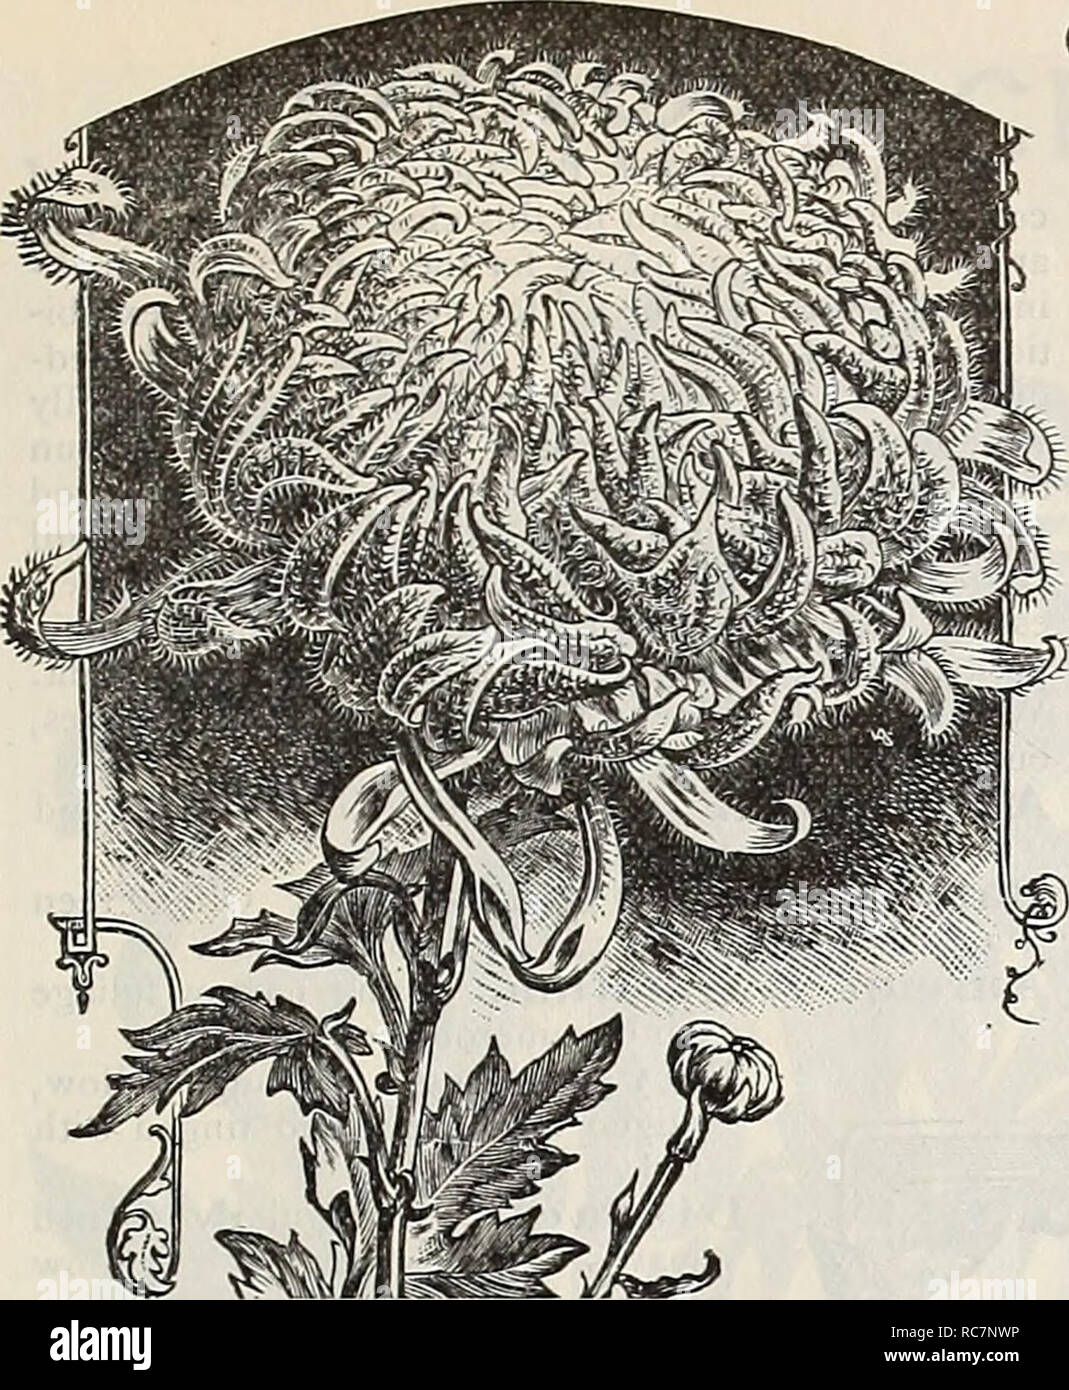 . Dreer's garden calendar : 1898. Seeds Catalogs; Nursery stock Catalogs; Gardening Catalogs; Flowers Seeds Catalogs; Vegetables Seeds Catalogs. BEST PLANTS FOR GARDEN AND GREENHOUSE. 115. Ostrich Plume Chrysanthemum. Cissus Discolor. A beautiful climber for hanging 5asket&gt;, with mottled and marbled ;rimsoii and green foliage. (See rut.) 20 cts. each. Cestrum Parqui. (Night=blooining Jasamine.) A beautiful tender shrub of easy ;uitivation, with small greenish- vhite flowers, of delightful fra- grance, which is dispensed during he night only. 15 cents each. Clerodendron Balfouri. A beautiful Stock Photo